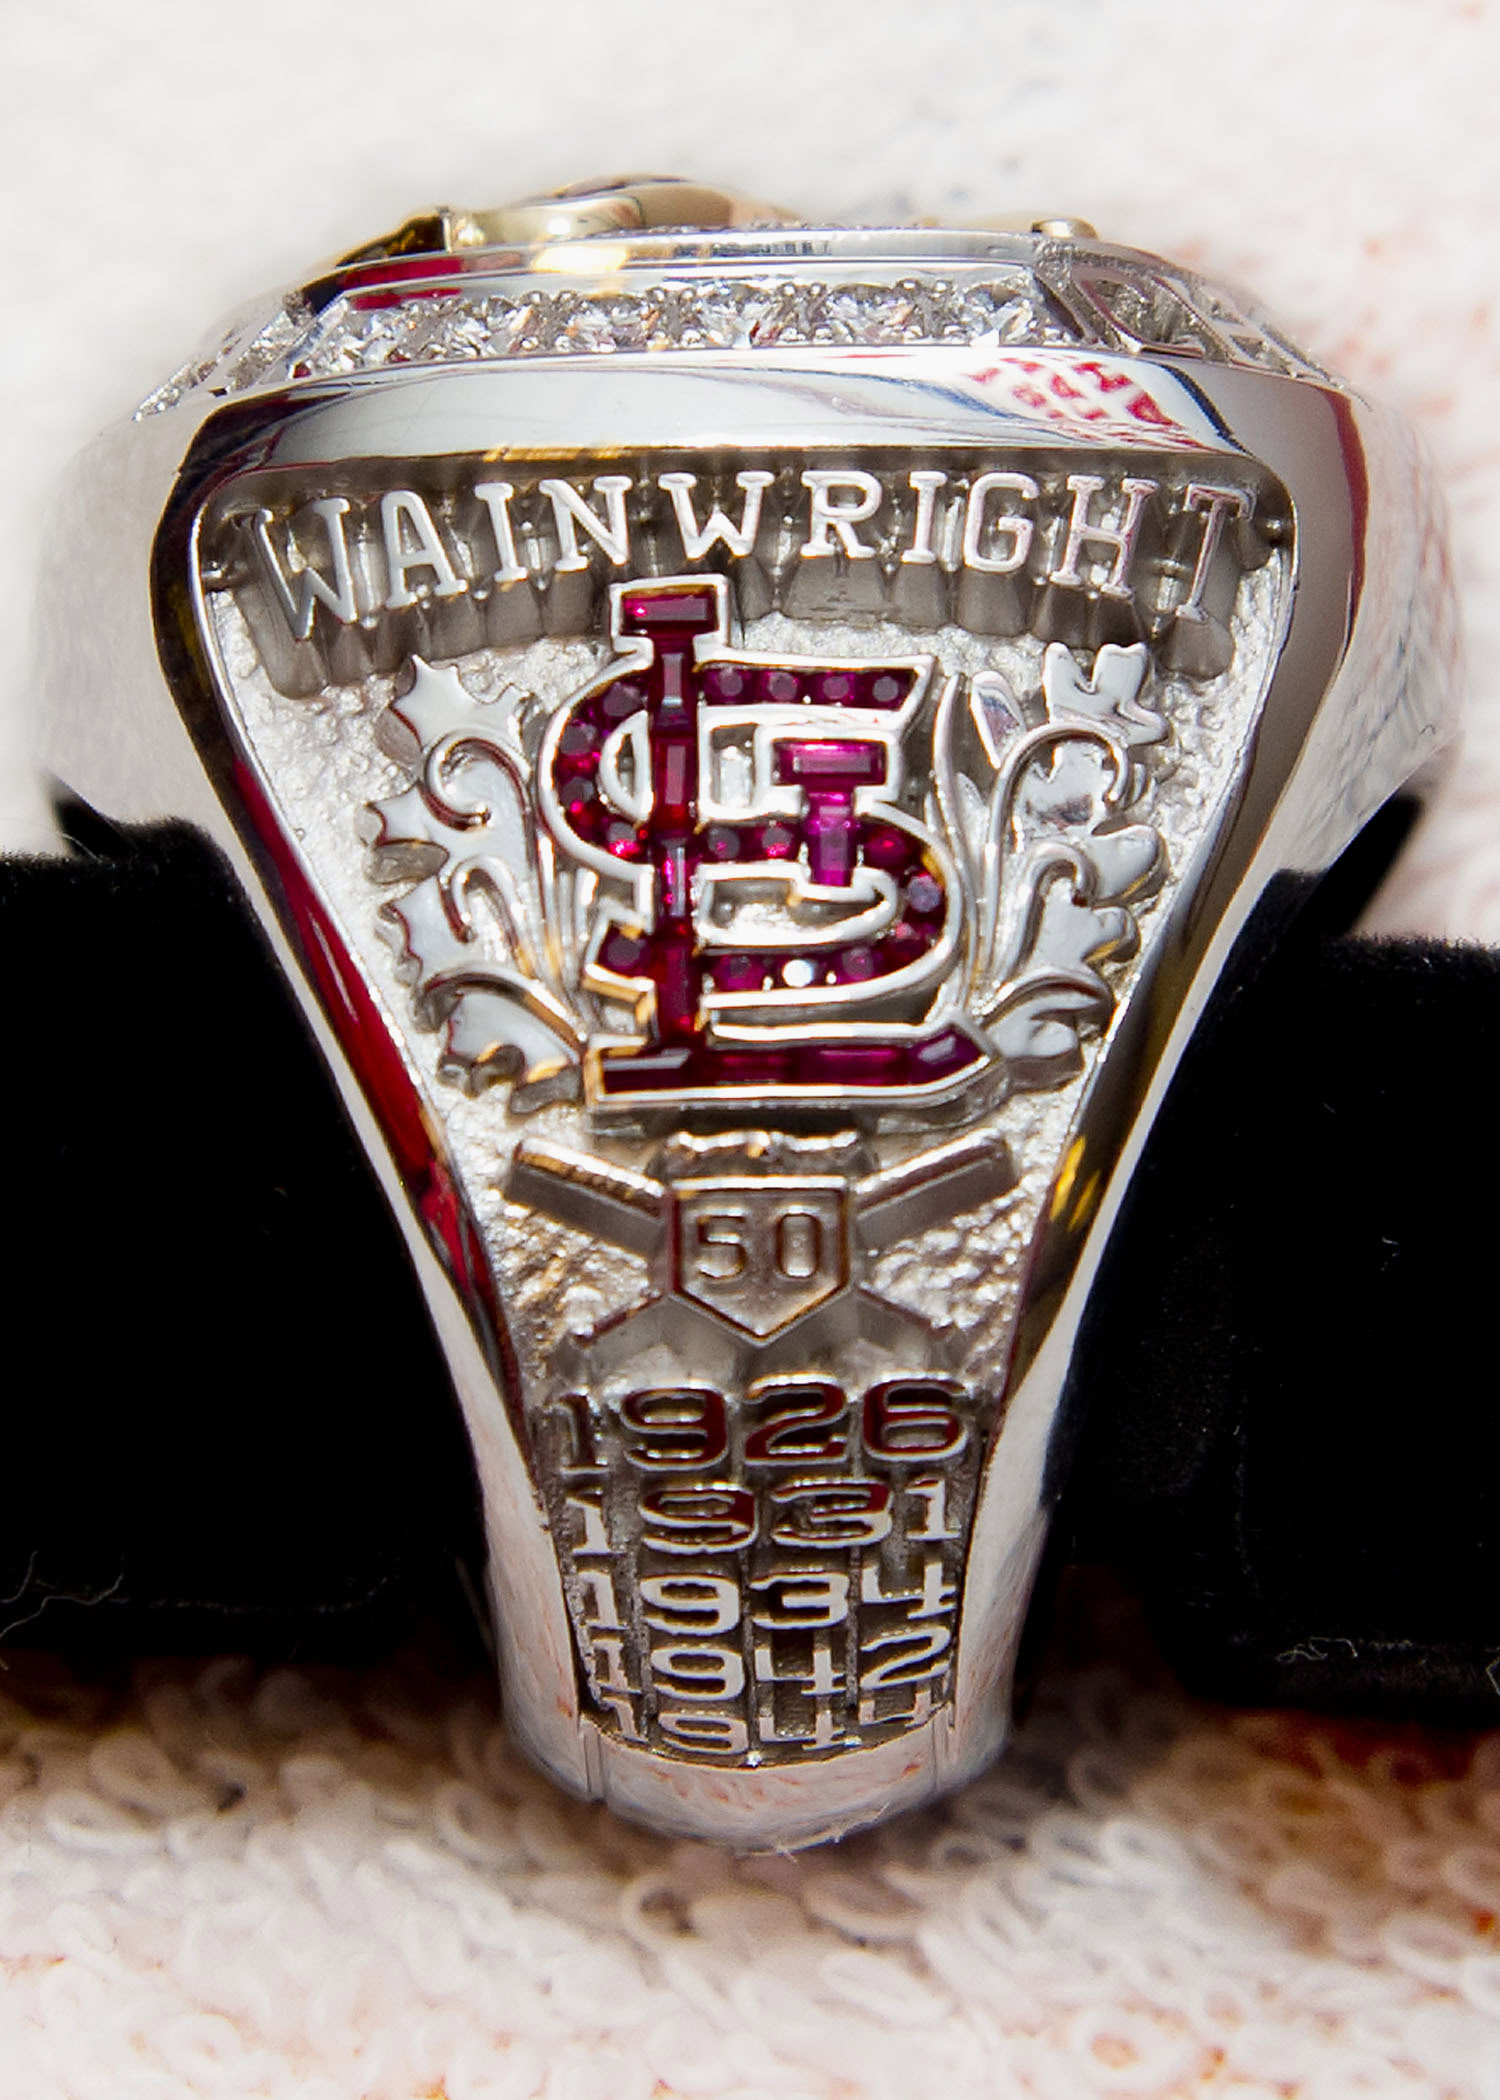 Sold at Auction: 2011 St. Louis Cardinals - MLB Inspired Championship Ring